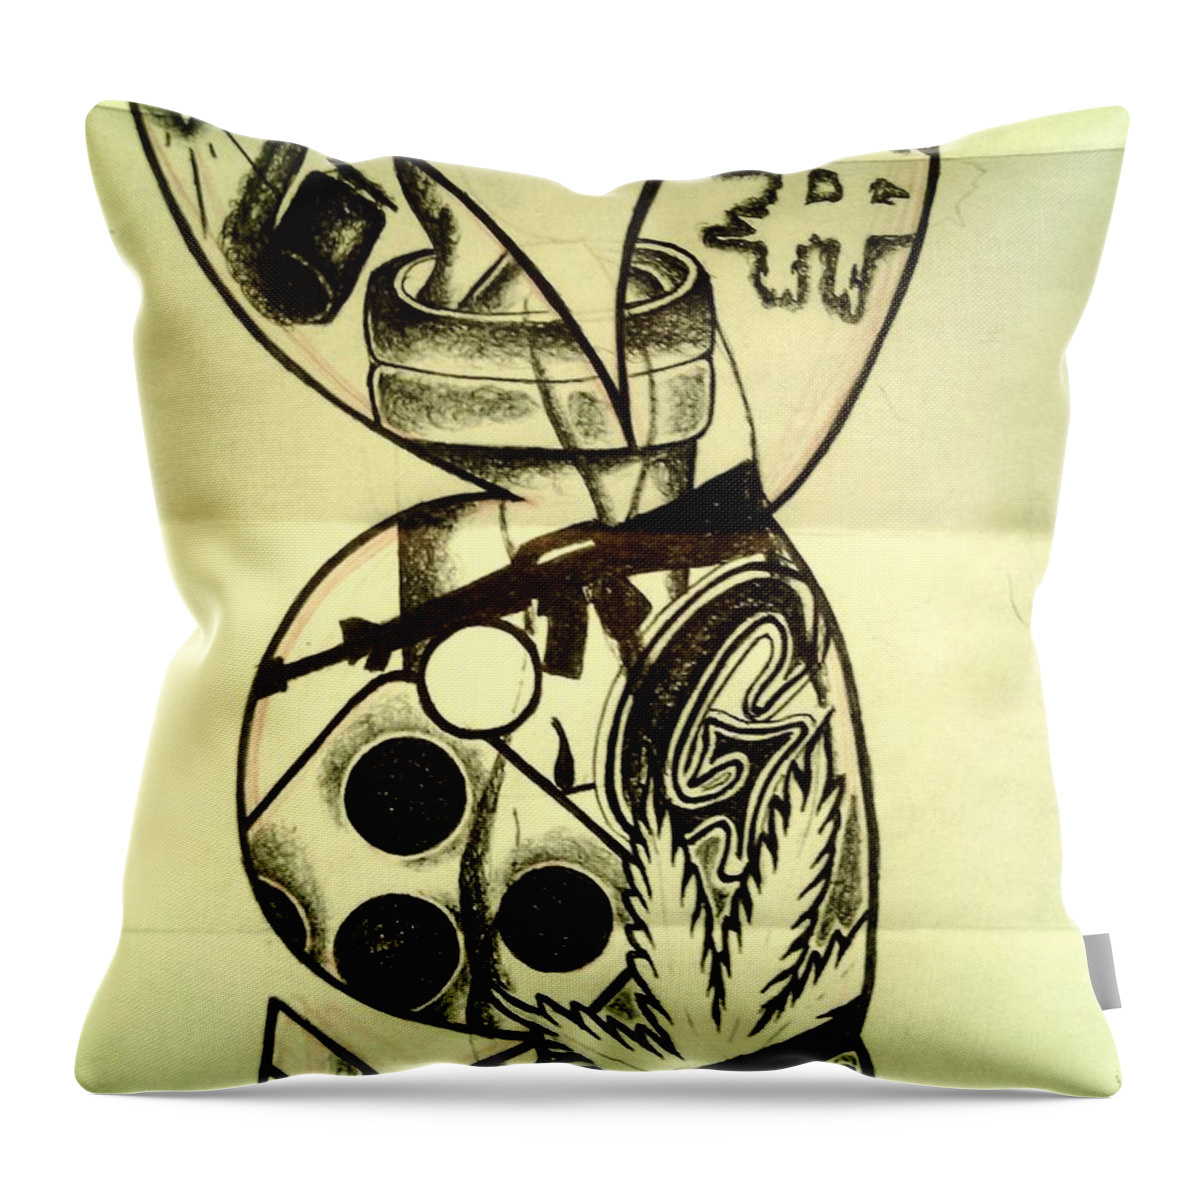 Black Art Throw Pillow featuring the drawing Untitled 13 by A S 